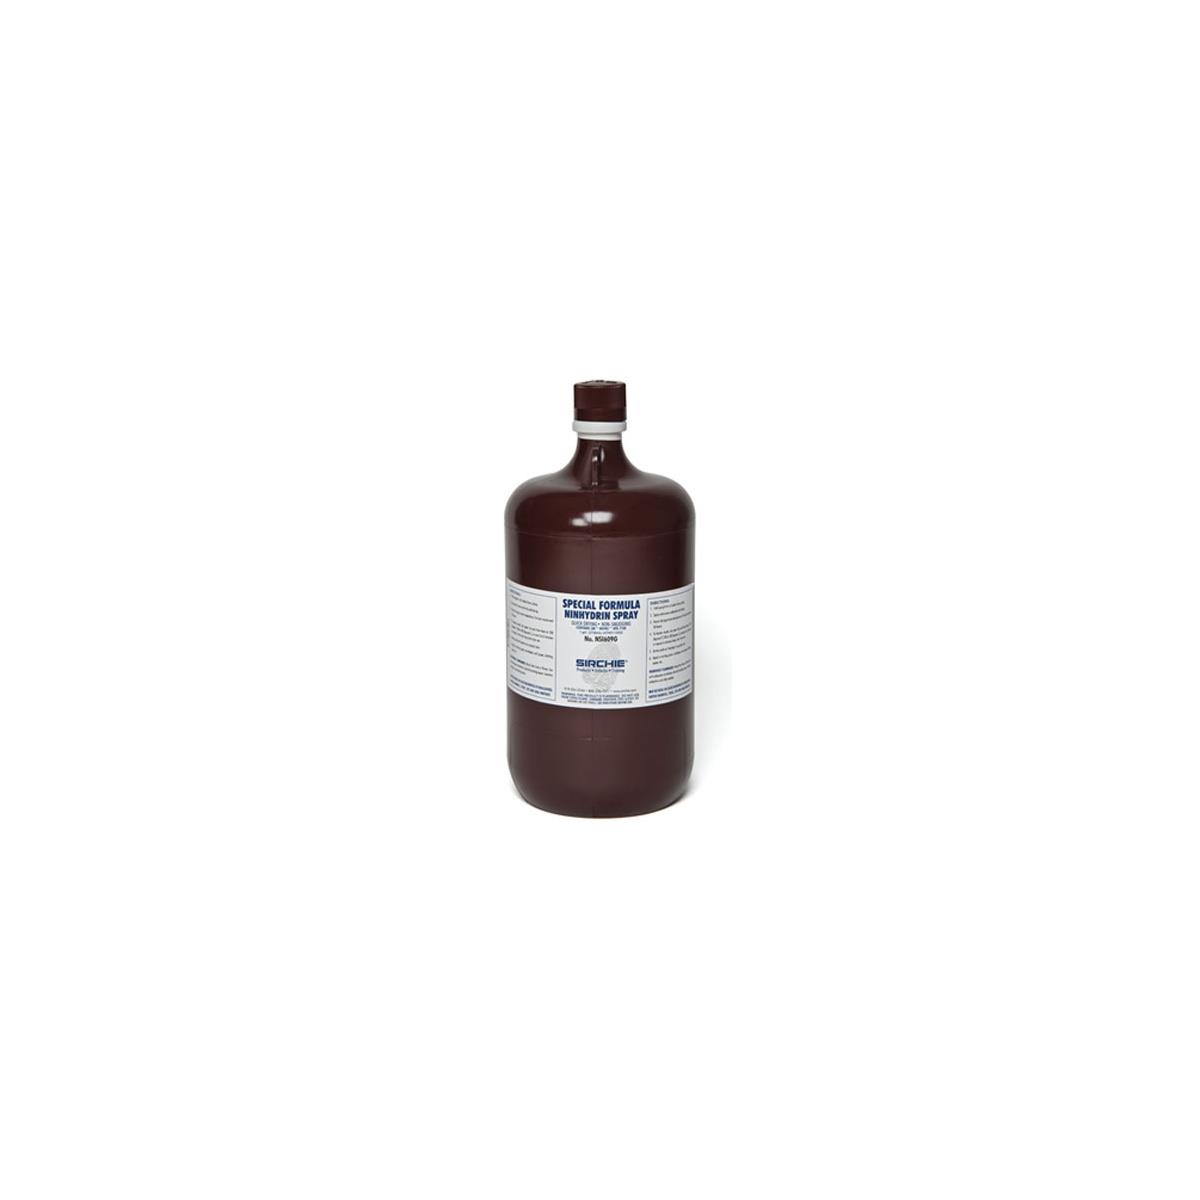 Image of Sirchie NSI609G Special Formula Ninhydrin